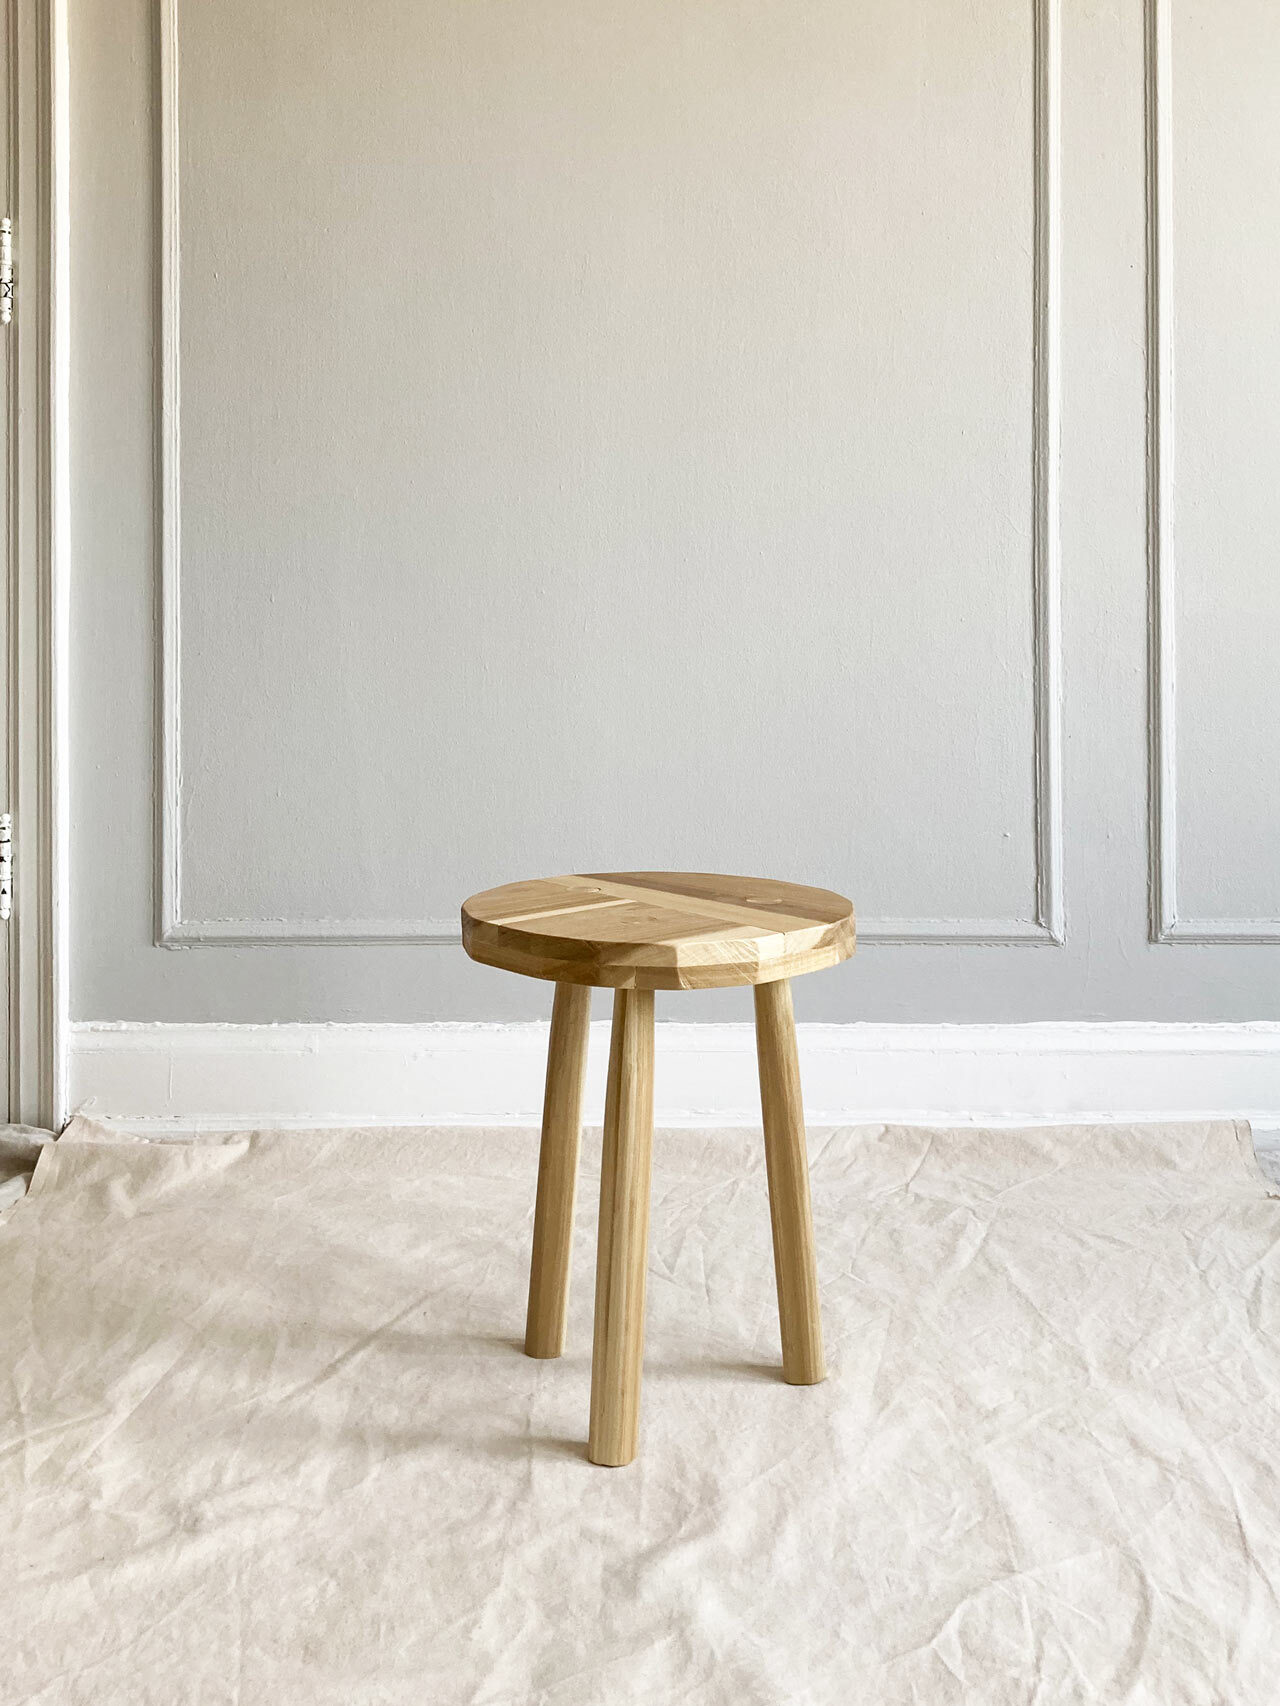 Simple Joinery Poplar Stool by Ian Anderson